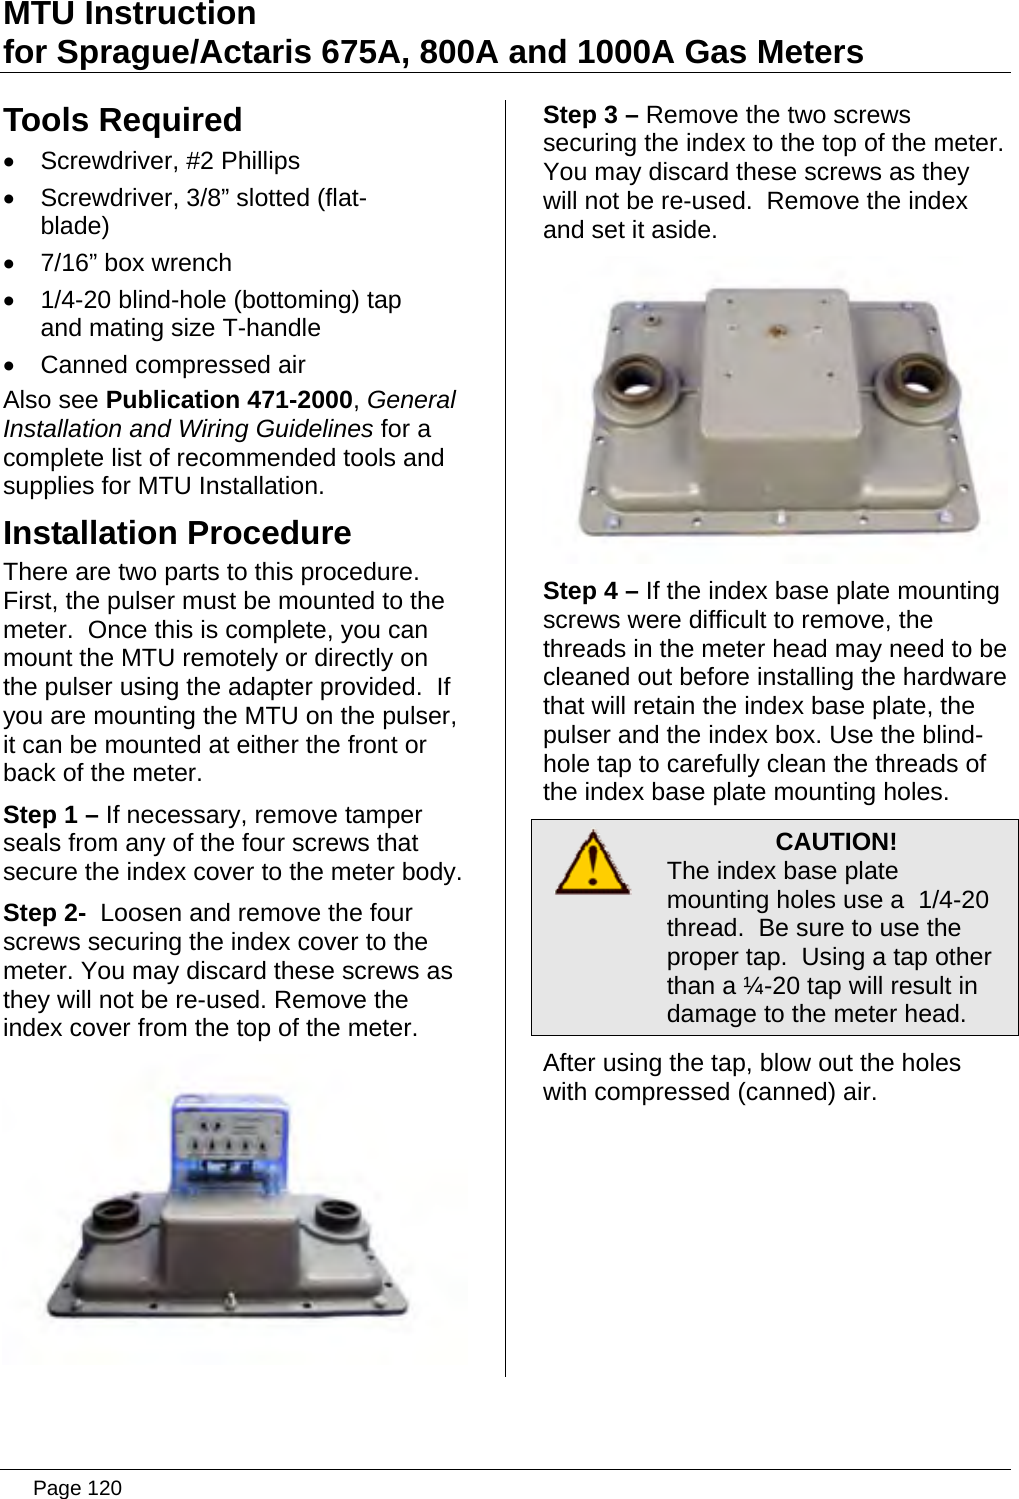 Page 120 of Aclara Technologies 09015 Transmitter for Meter Reading User Manual users manual